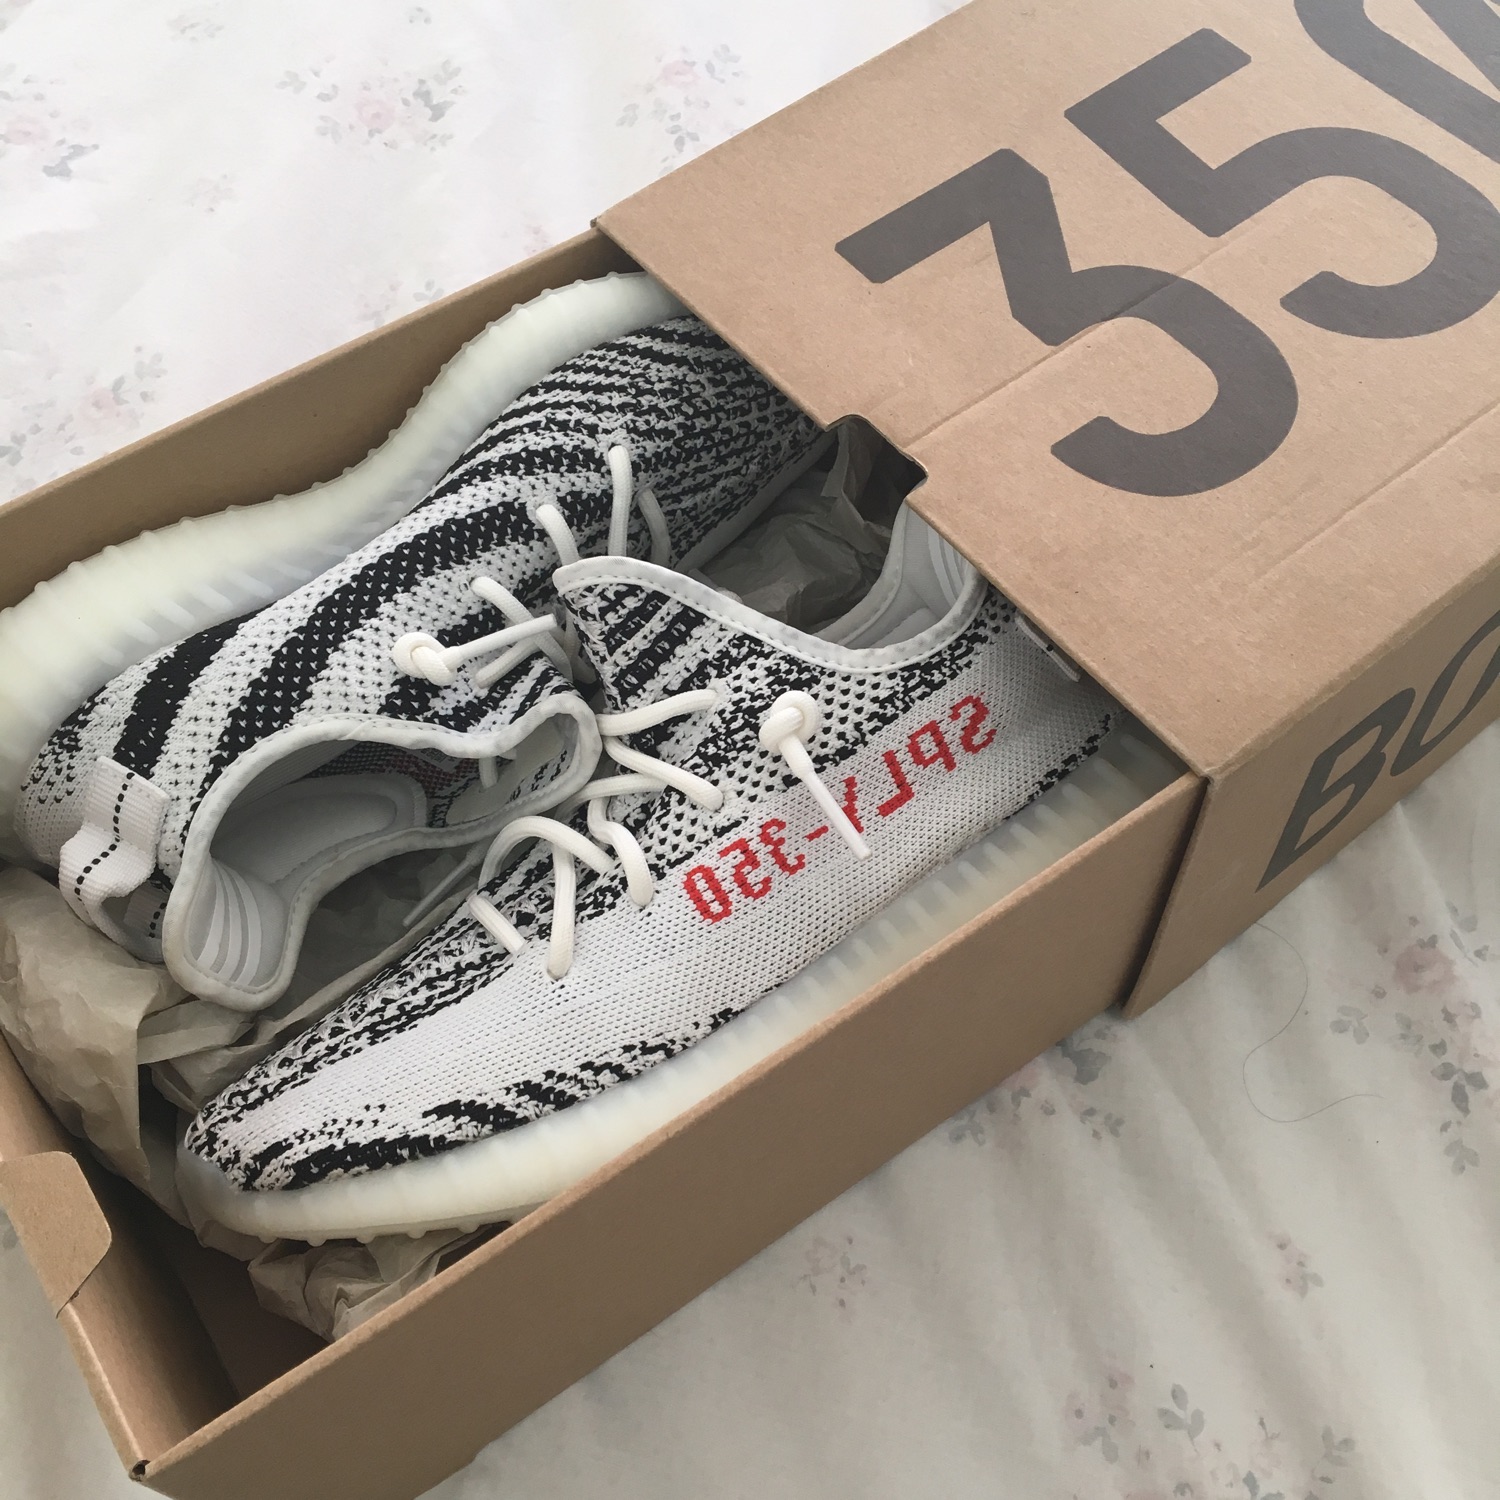 Ultimate Guide to the Yeezy 350 v2 Zebra